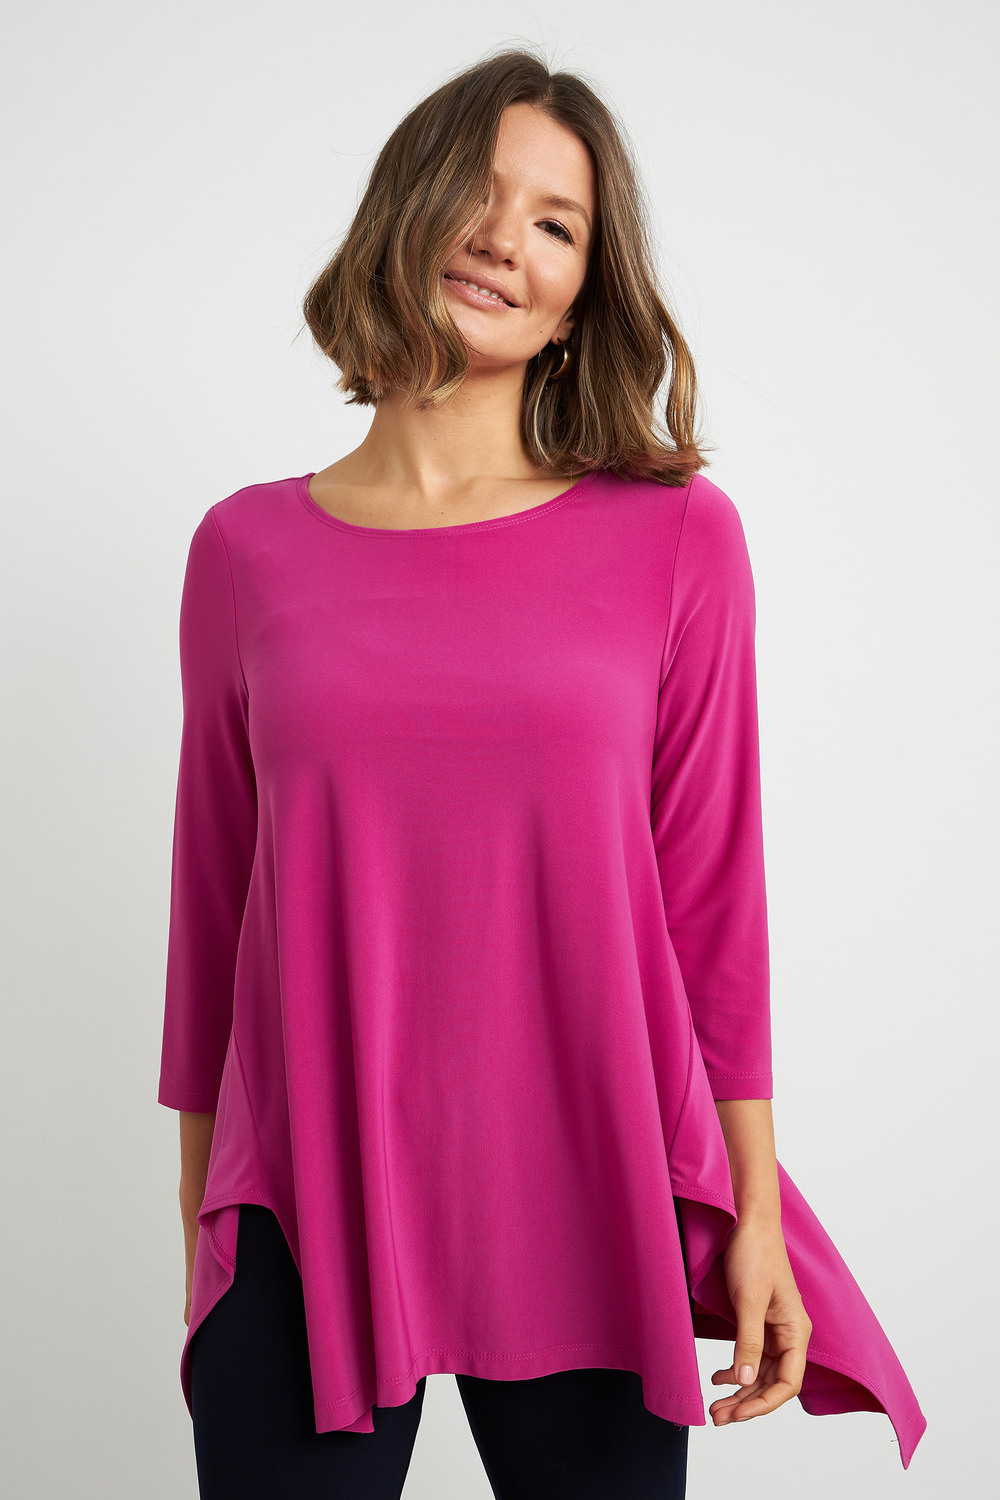 Joseph Ribkoff Relaxed Fit Top Style 211032. Orchid